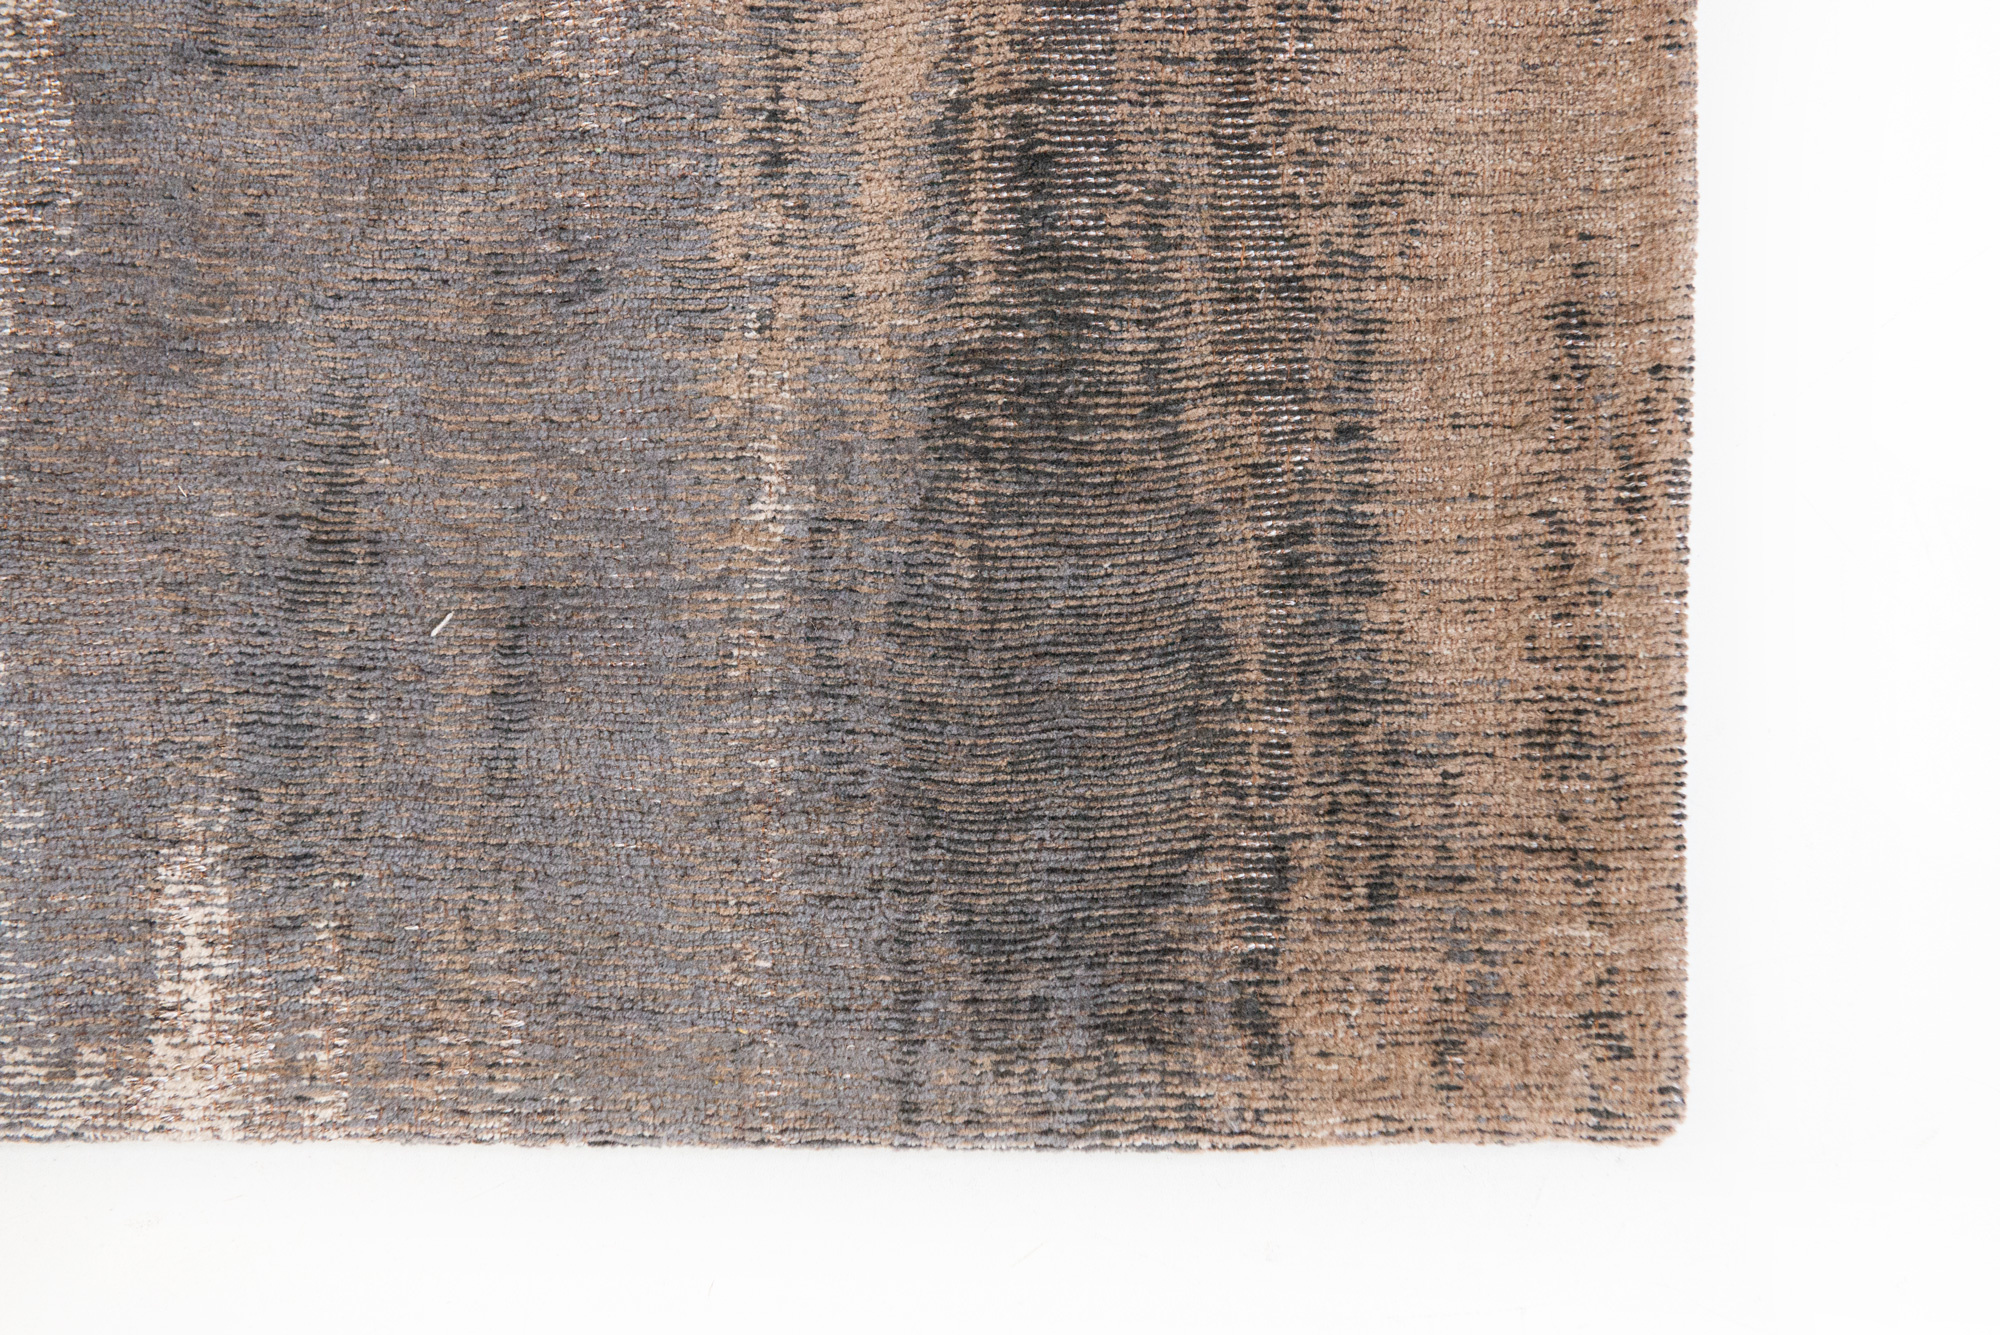 Abstract Flatwoven Beige Rug ☞ Size: 4' 7" x 6' 7" (140 x 200 cm)